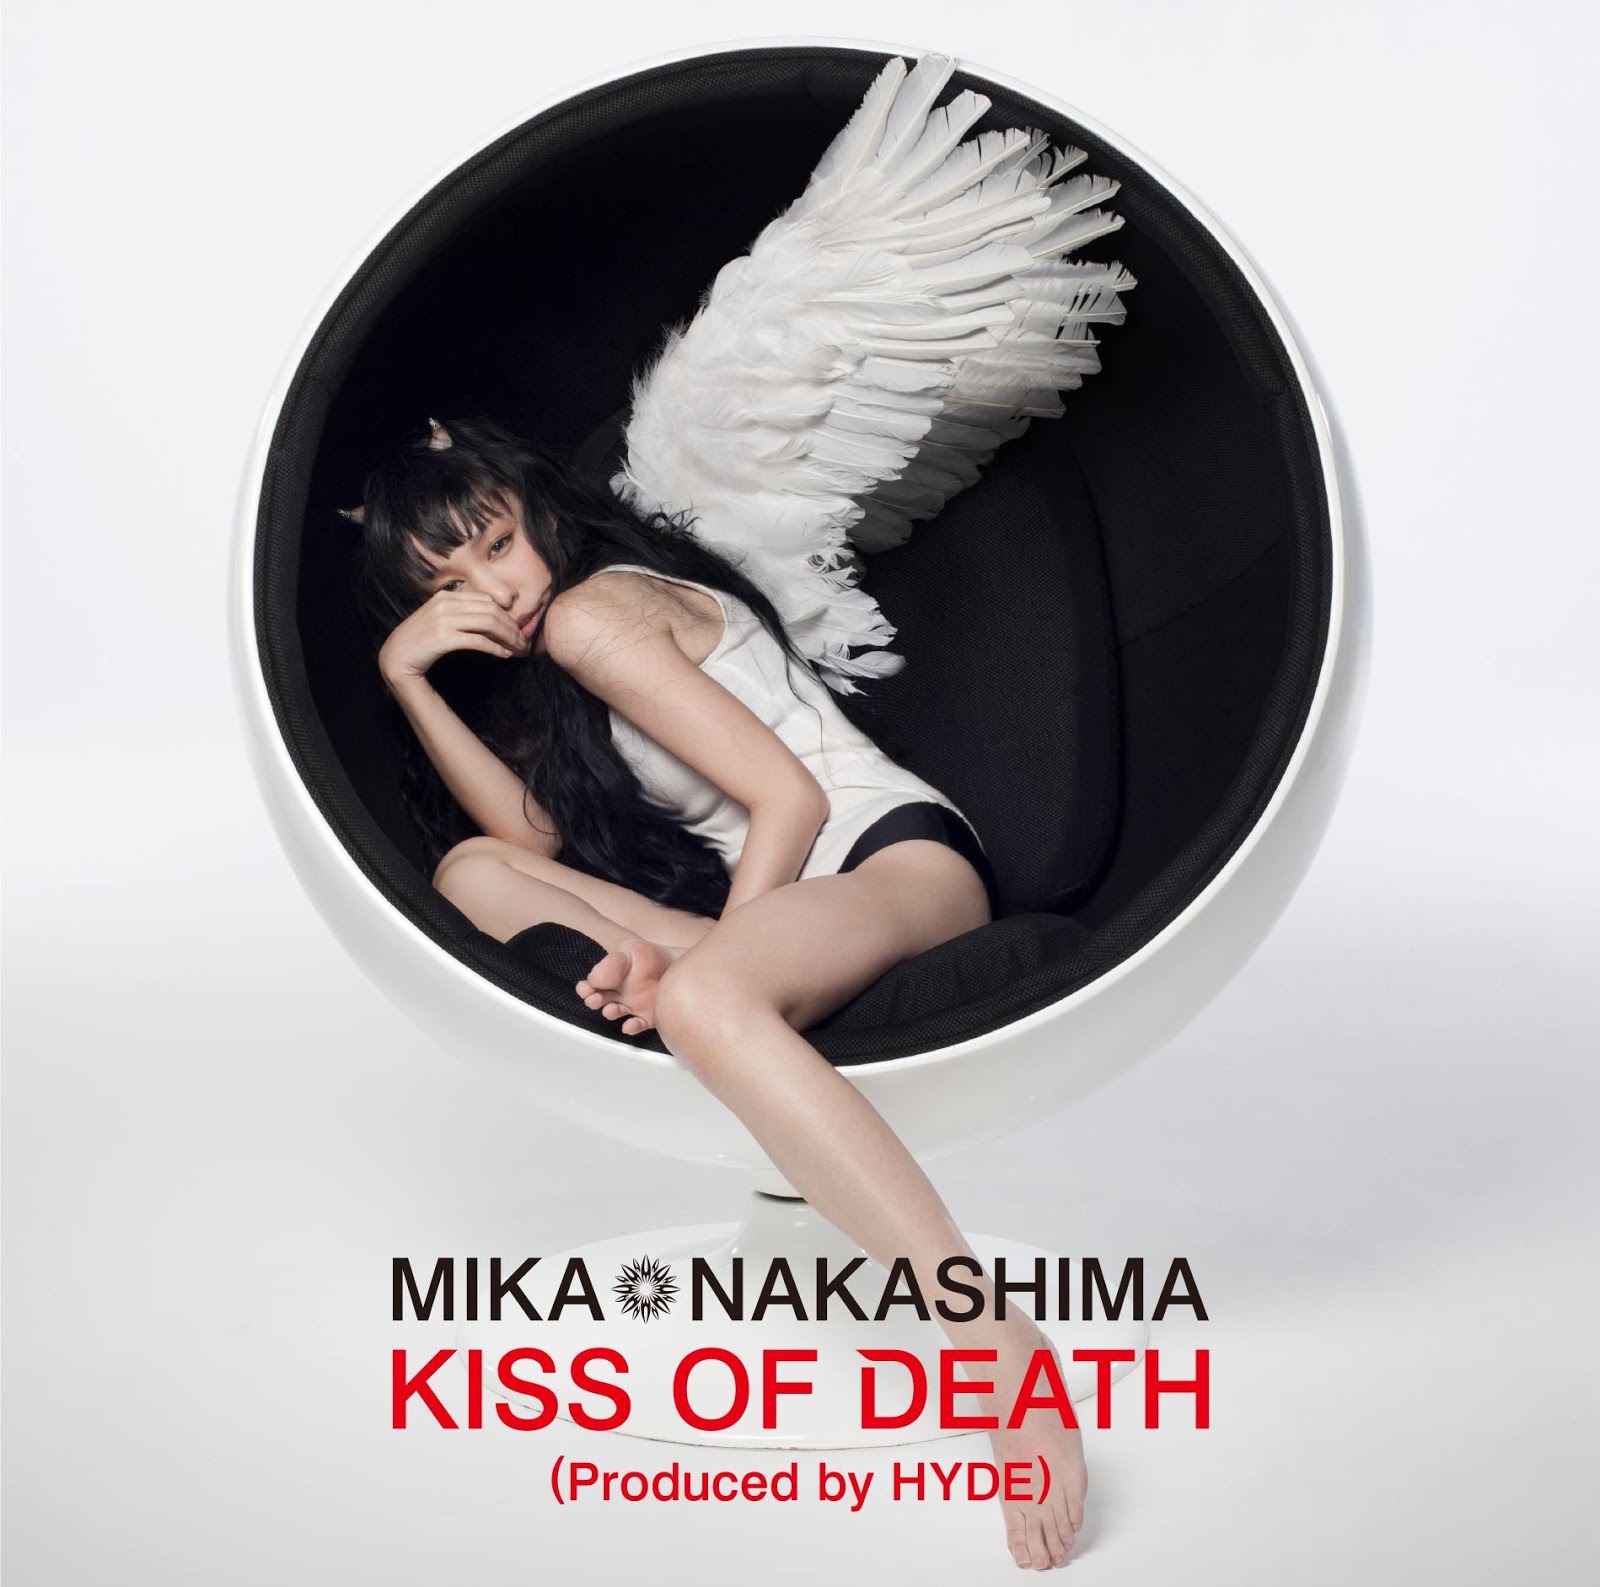 [SINGLE] 中島美嘉 (Mika Nakashima) - KISS OF DEATH (Produced by HYDE) [ーリン・イン・ザ・フランキス OP 1] [Darling in the FranXX OP 1] [07.03.2018].zip